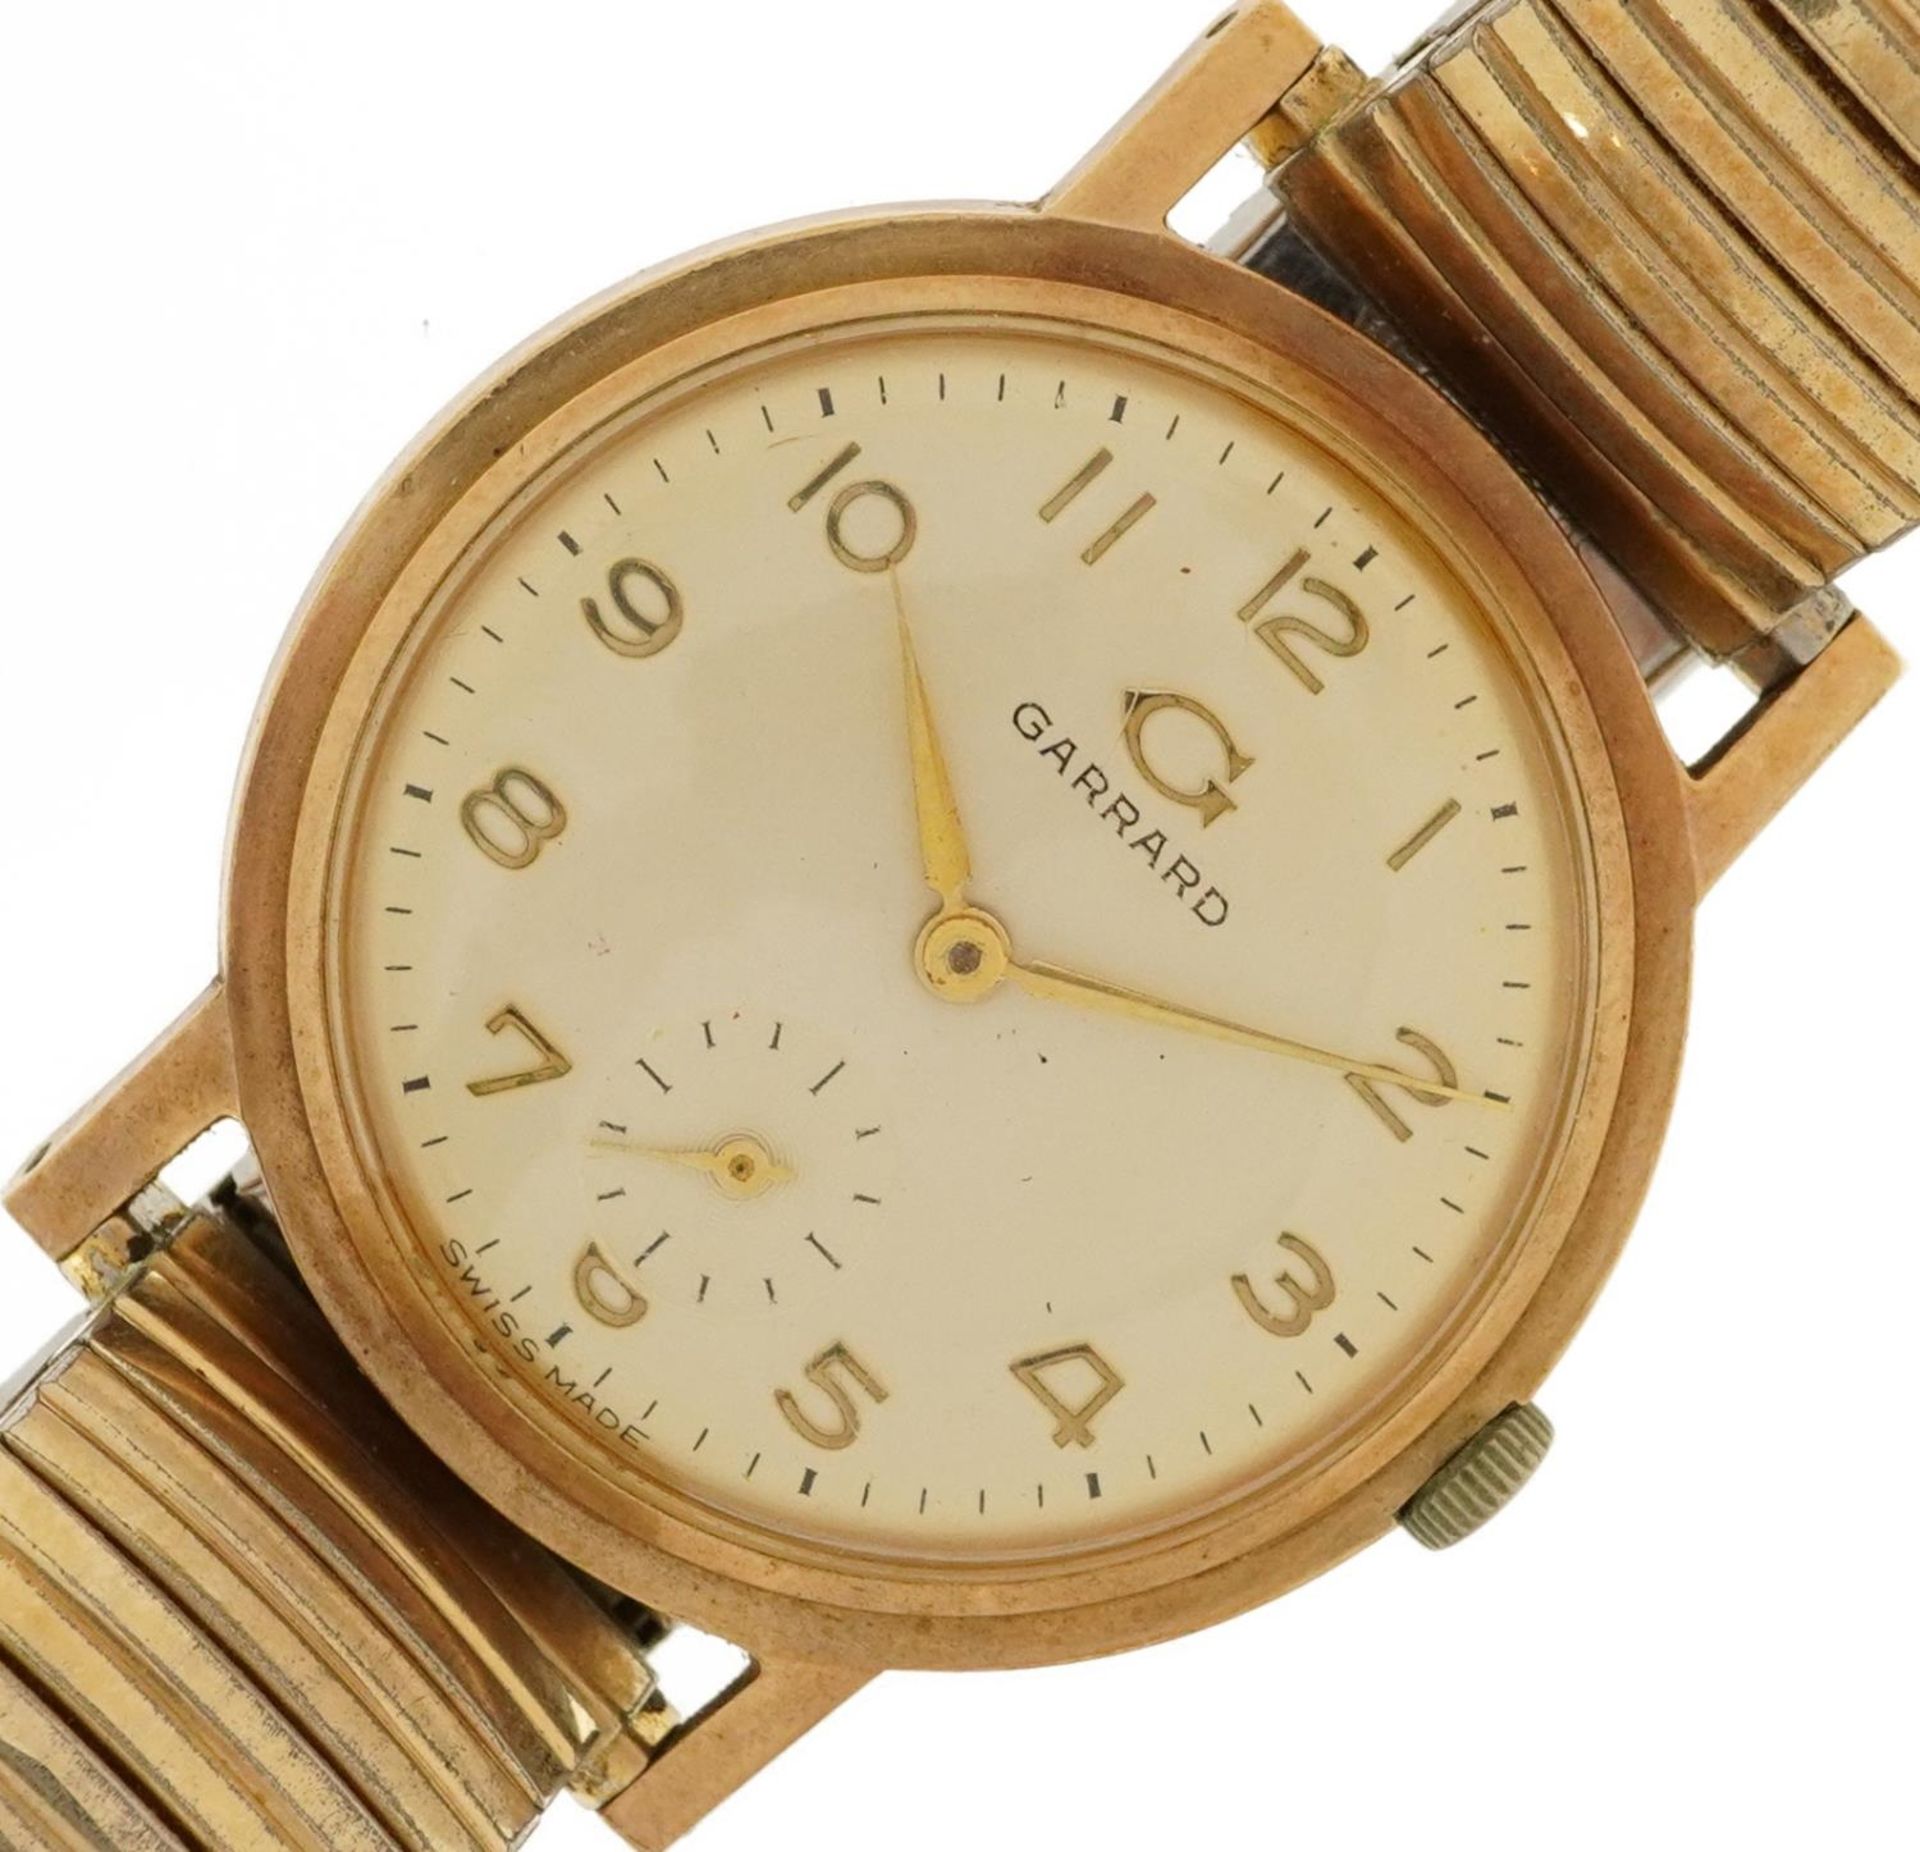 Garrard, gentlemen's 9ct gold manual wristwatch with subsidiary dial, the case numbered 189162, 34mm